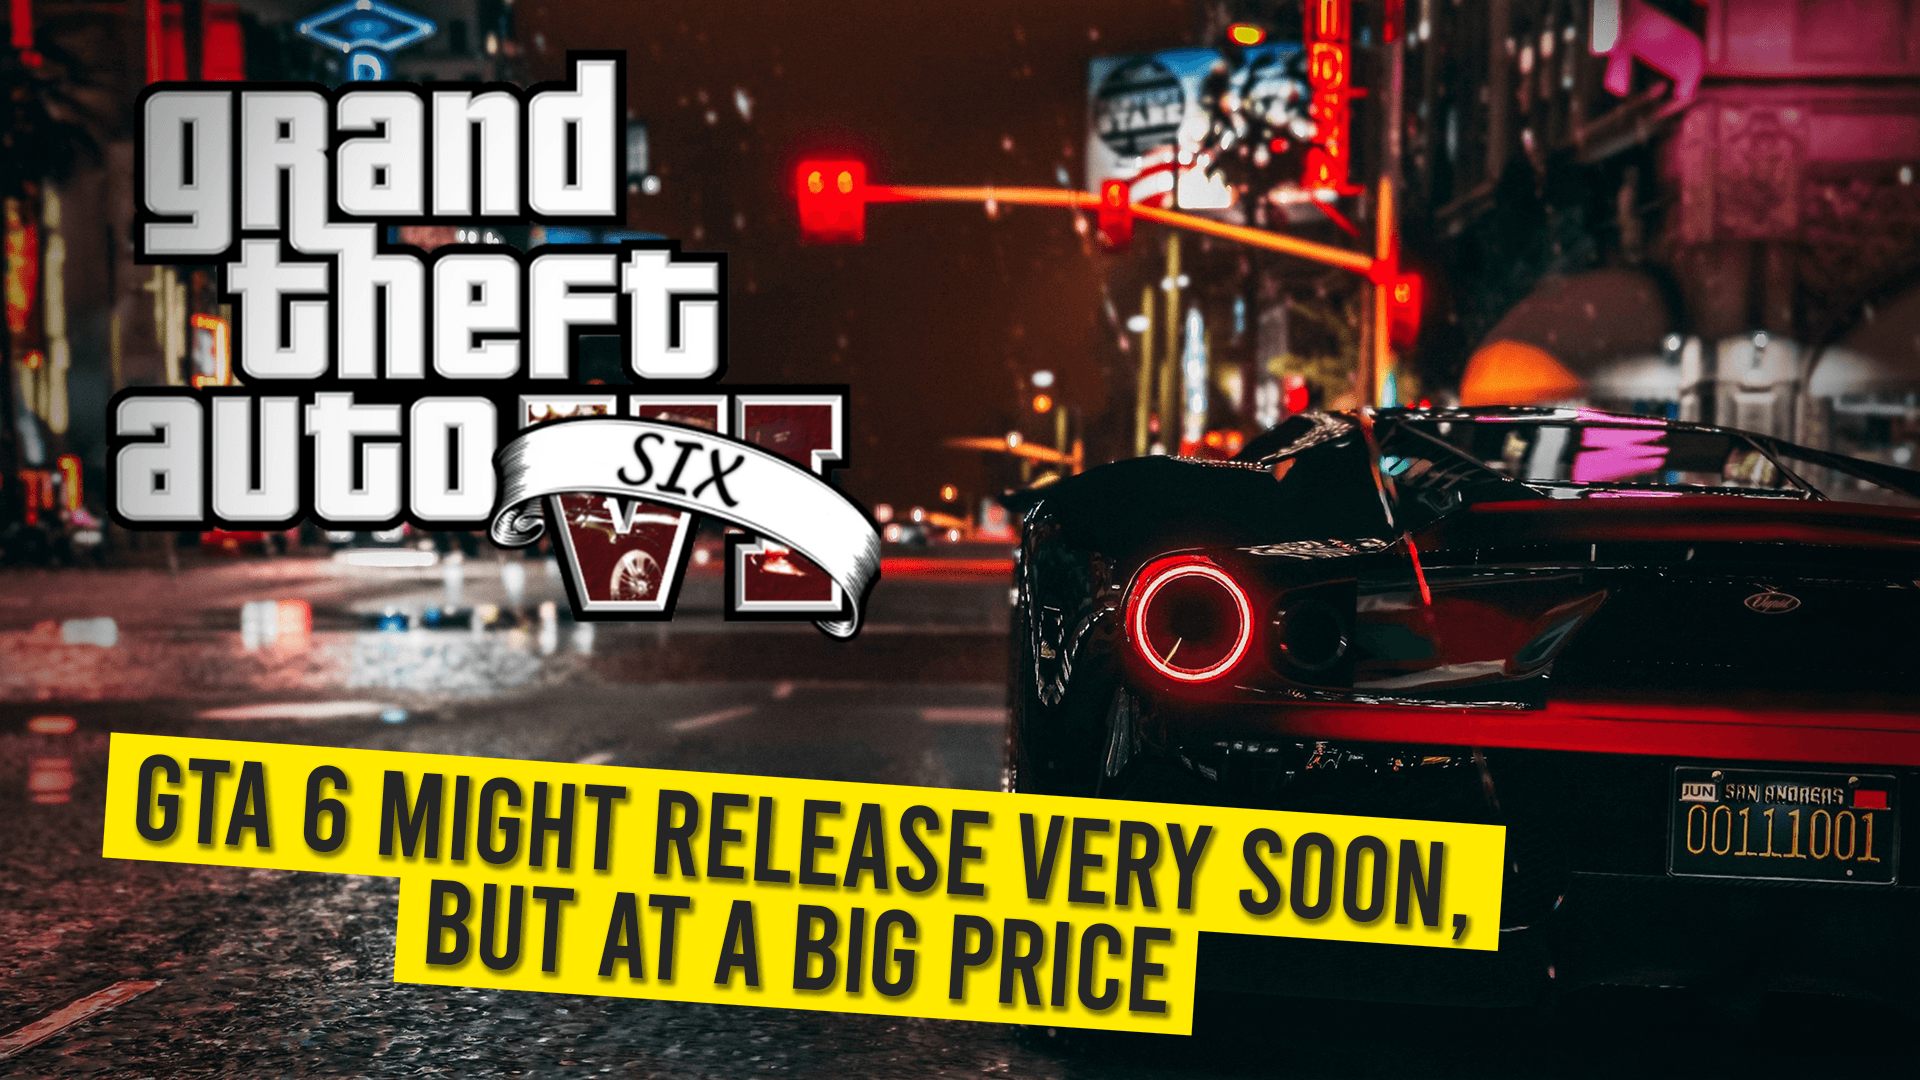 GTA 6 Might Release Very Soon, But At A Big Price